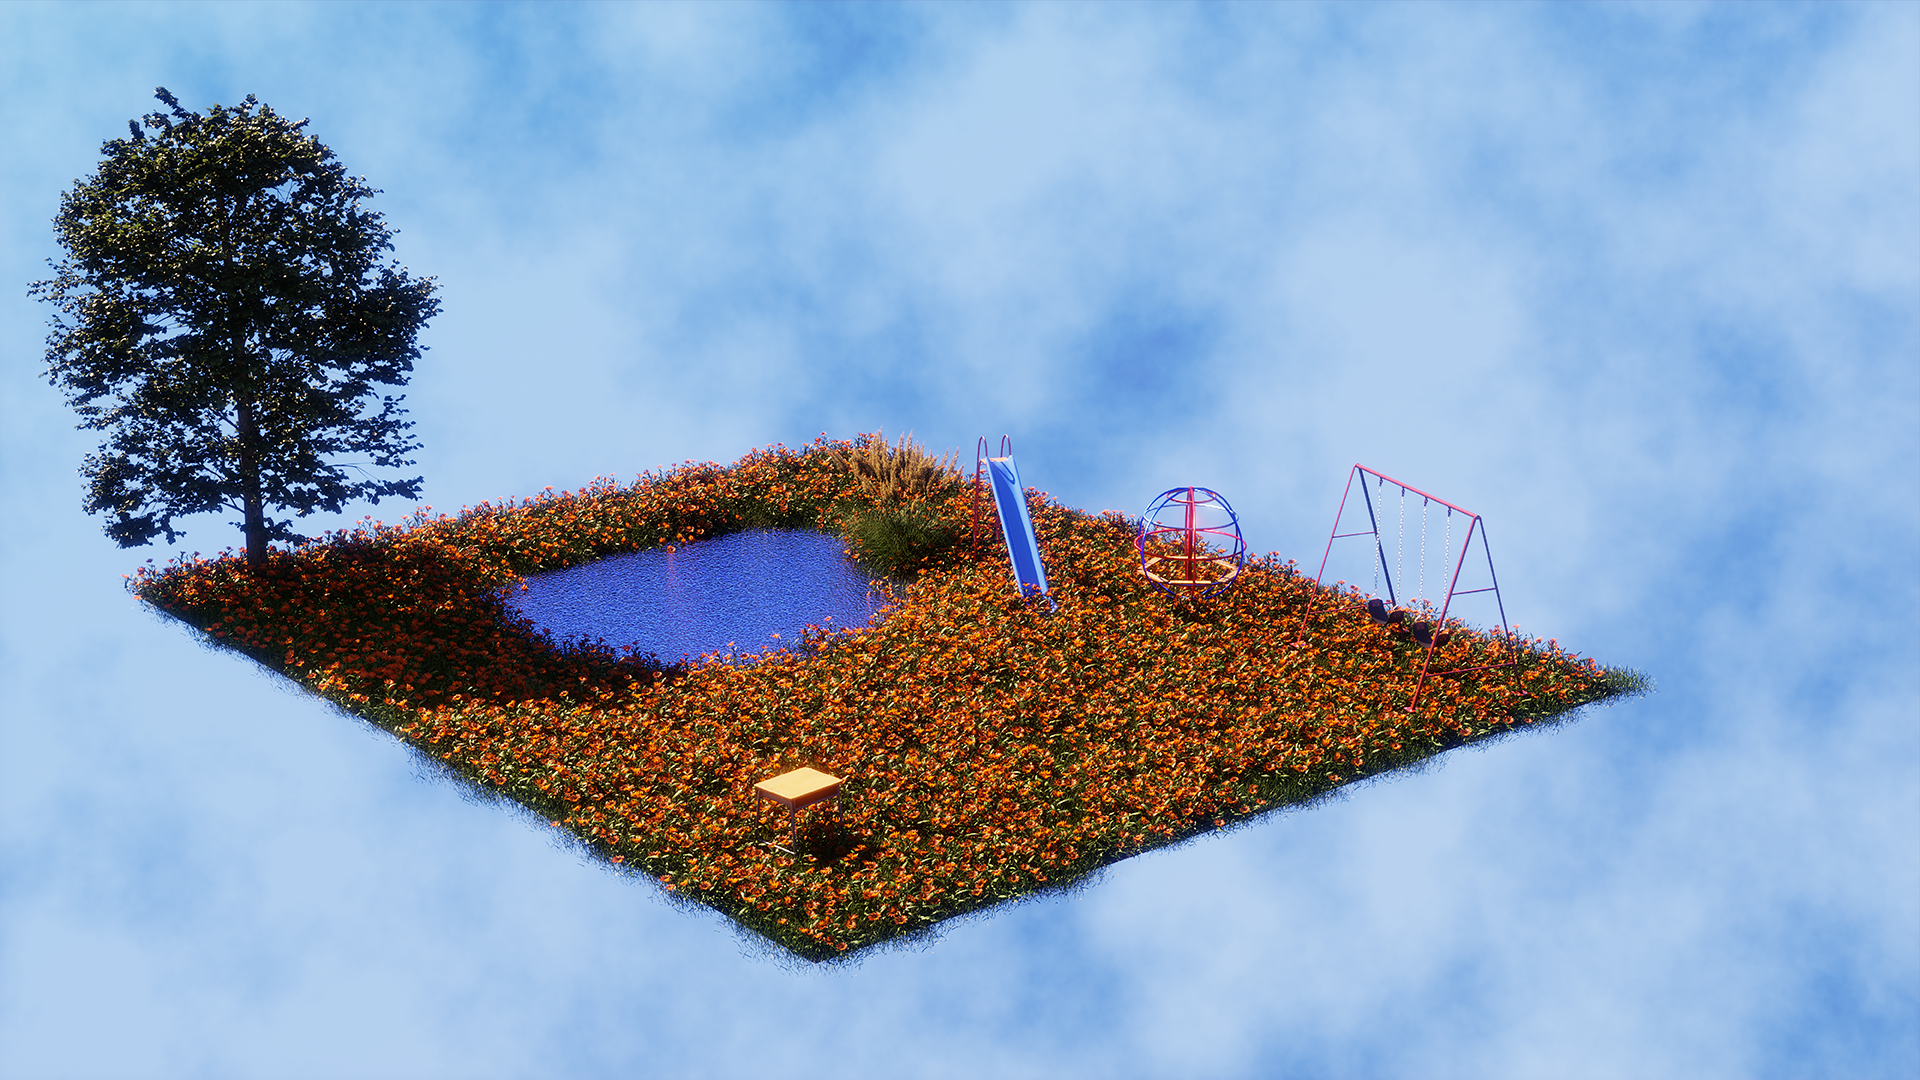 A meadow filled with marigold flowers with a pond, a slide, a play structure, a swing set, a school desk, and a tree, floating in a blue sky and white clouds.